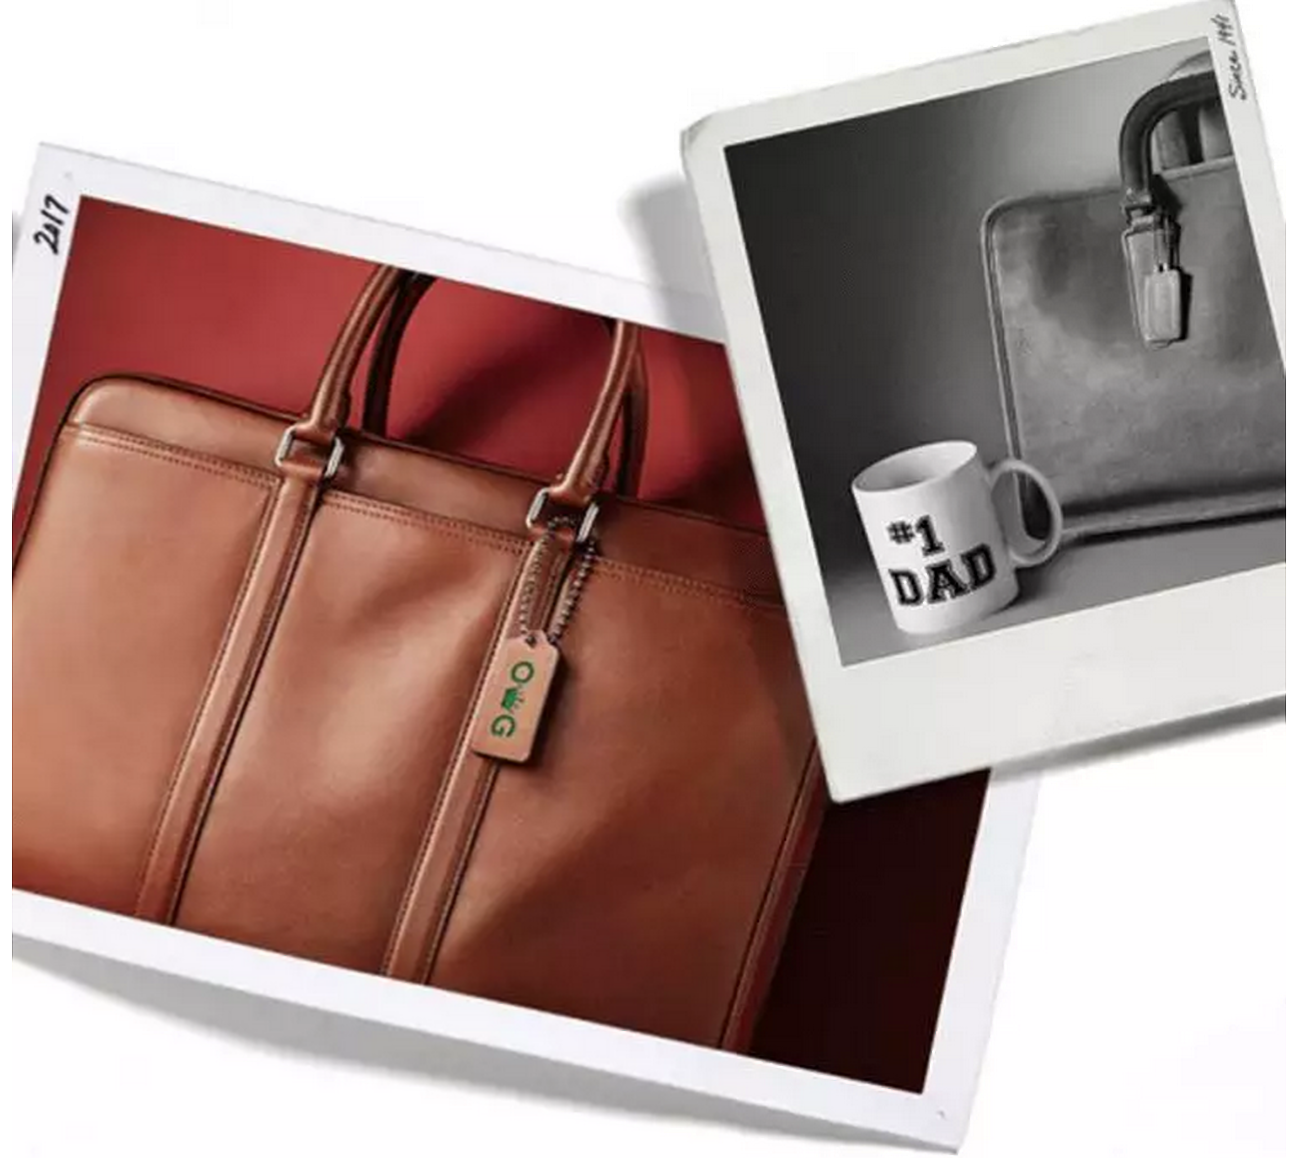 10 Great Luxury WeChat Campaigns for Father’s Day in China